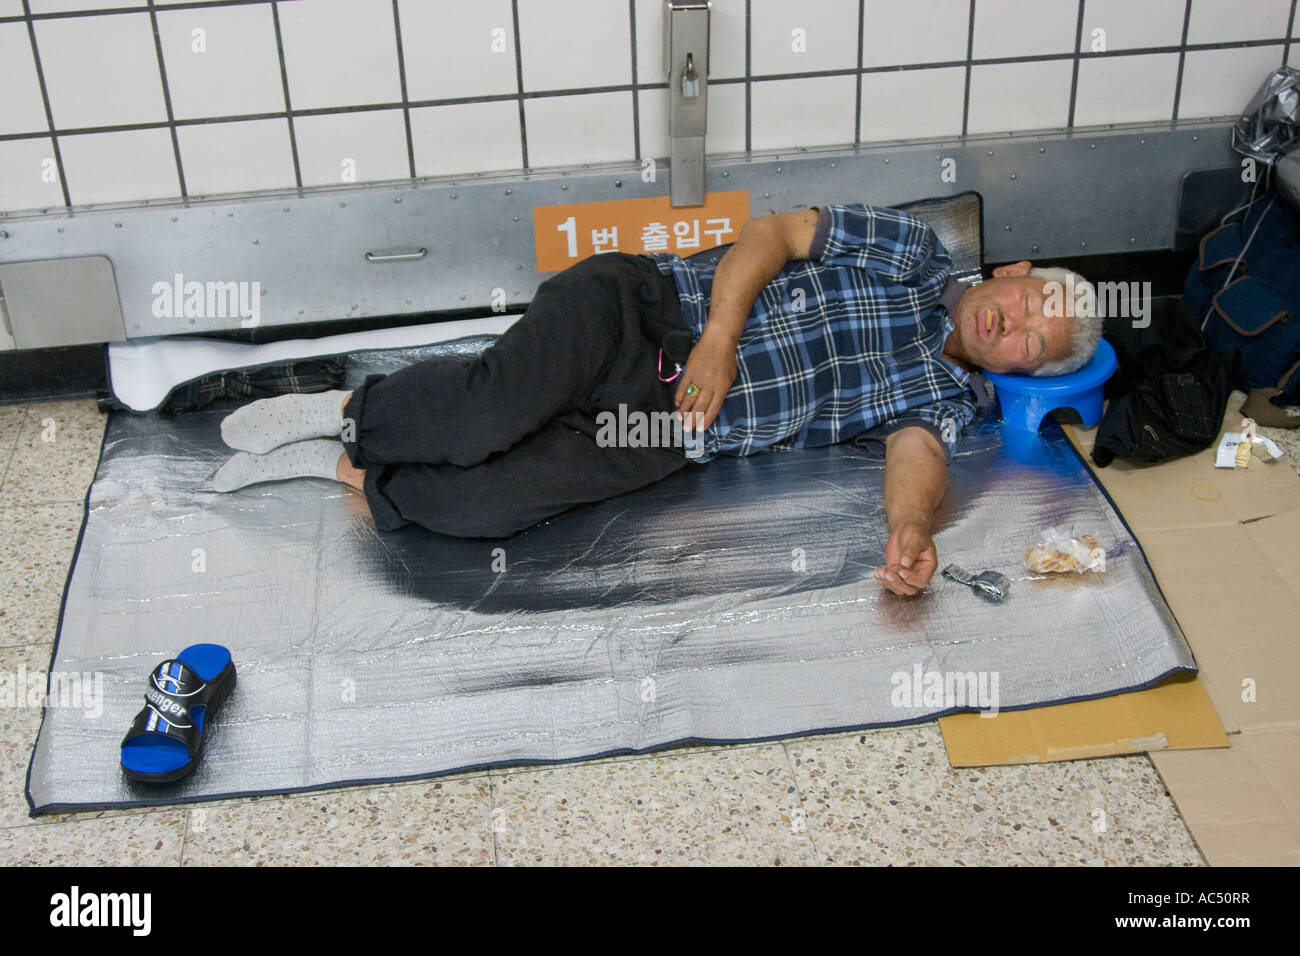 Middle Aged Homeless Man Sleeping in the Subway Seoul South Korea Stock Photo